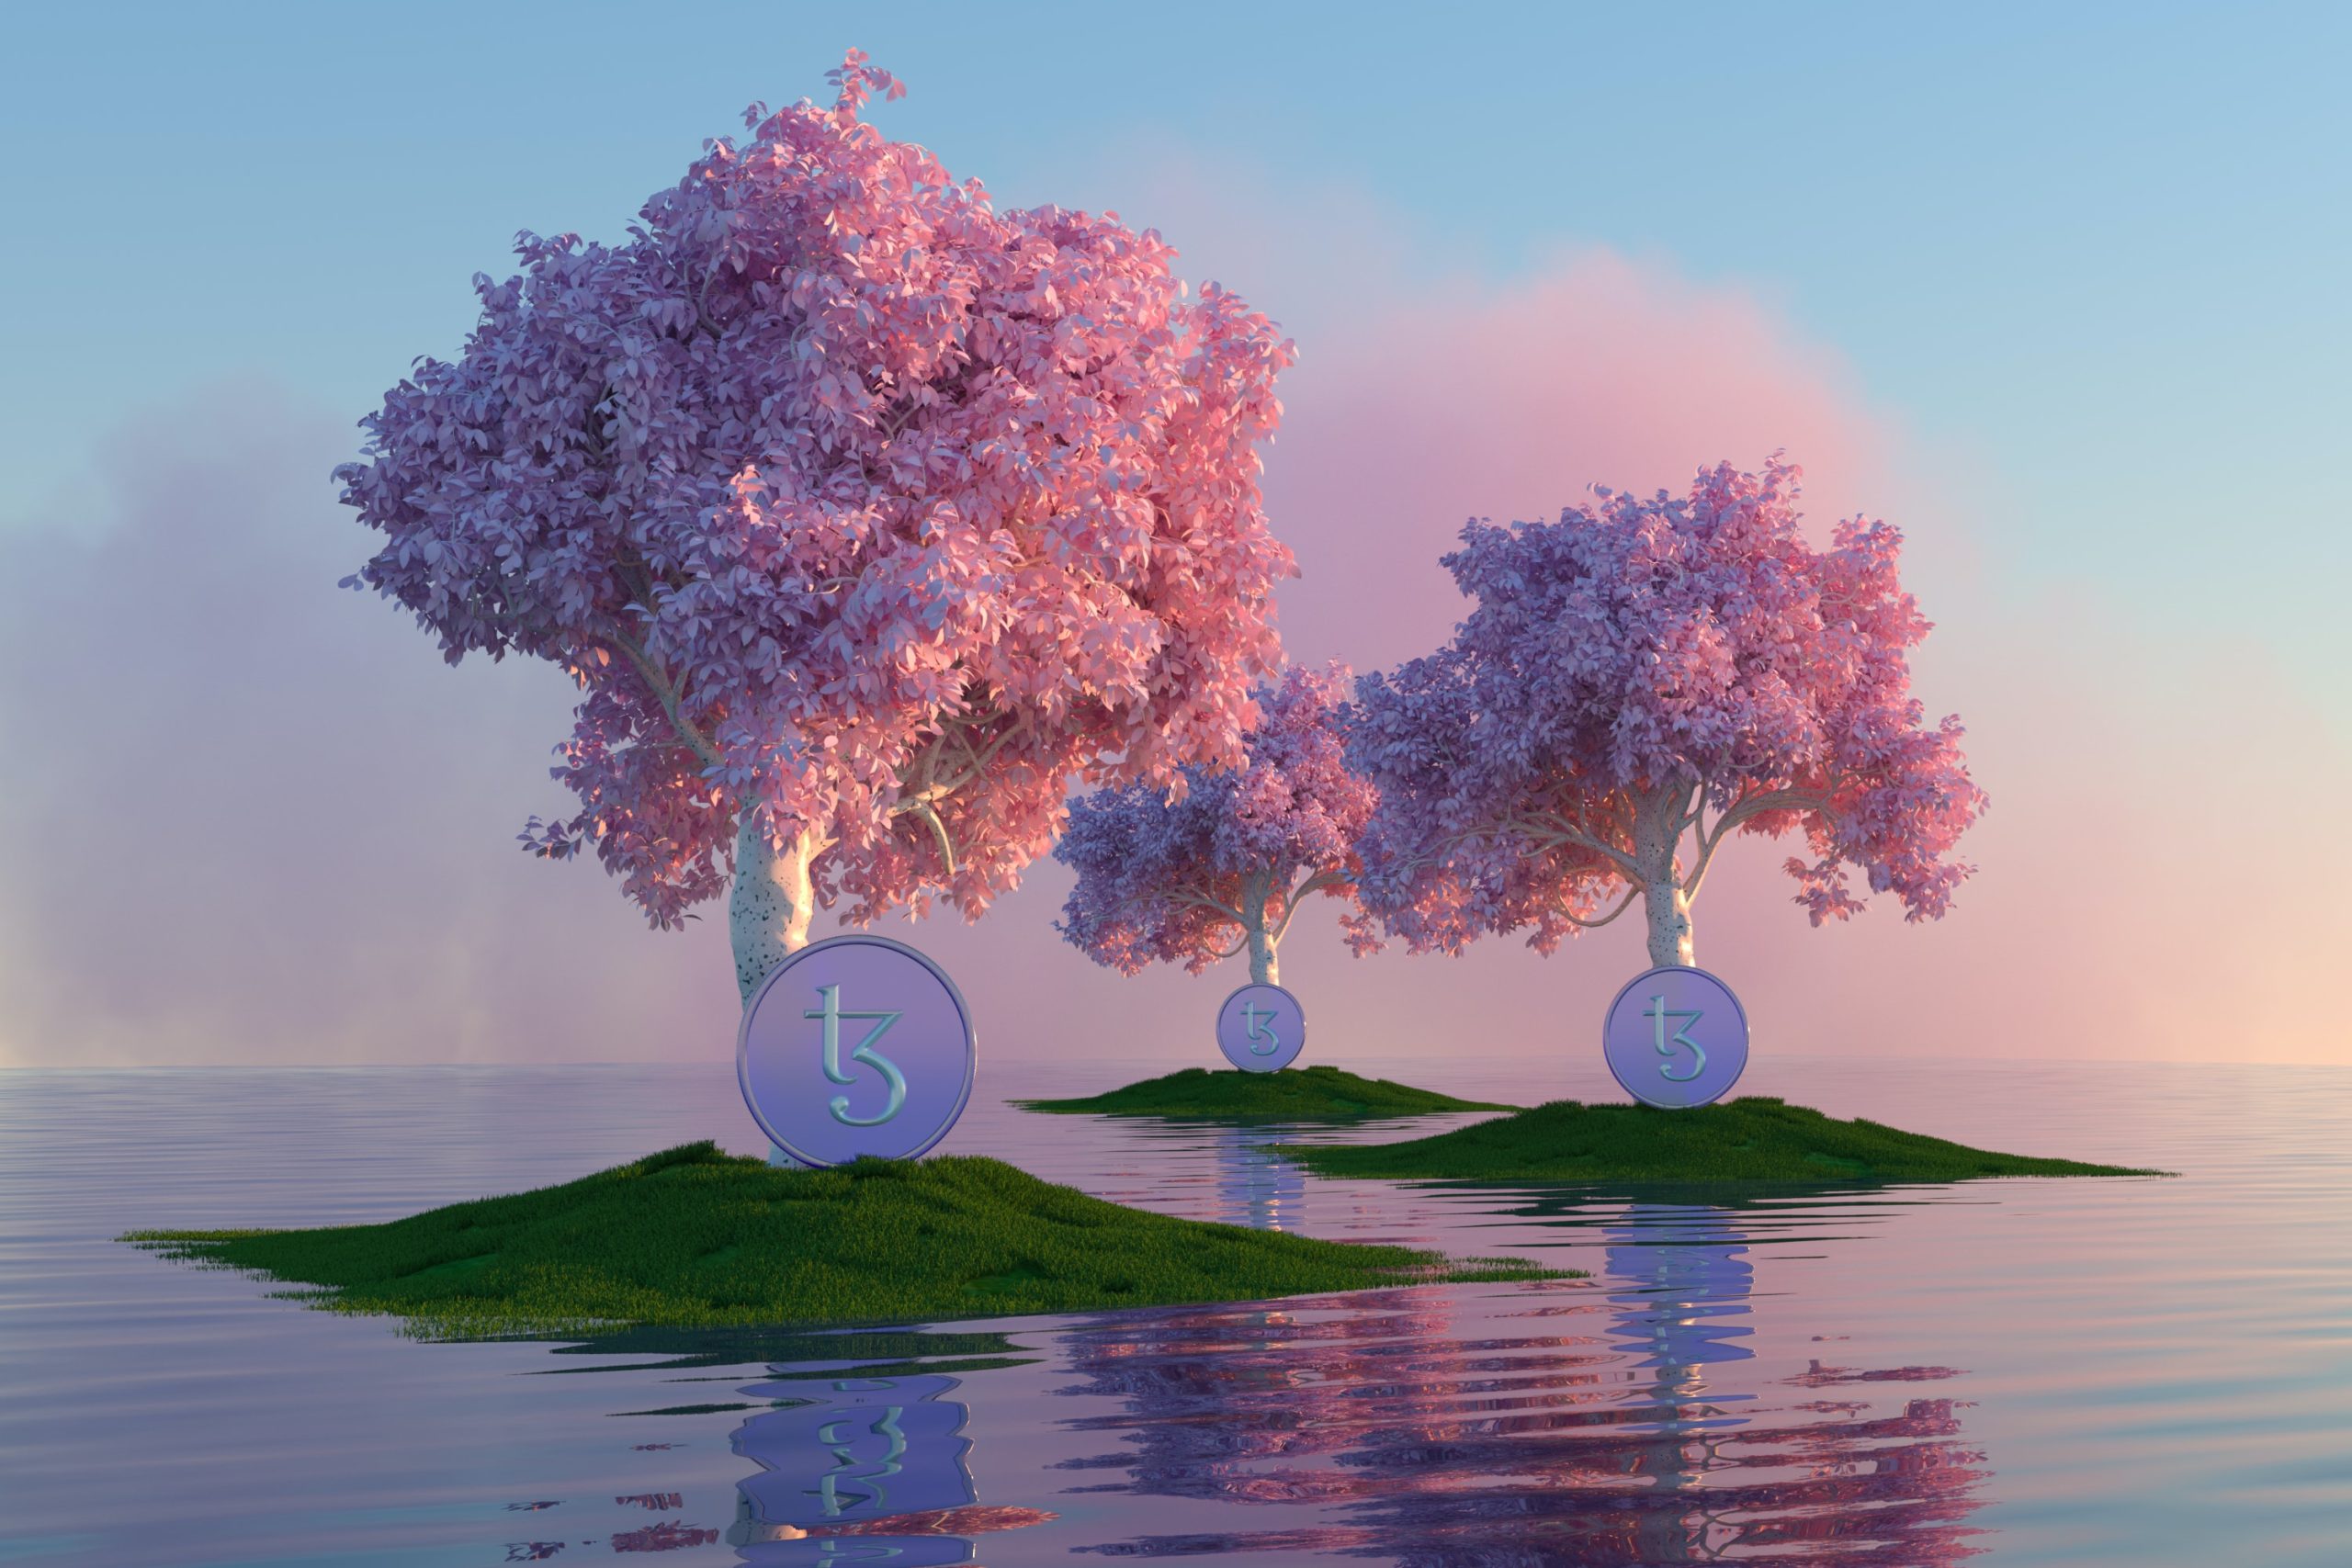 A 3D animated images of three pink trees. The ground is water. The image has a blue, pink and purple hue.